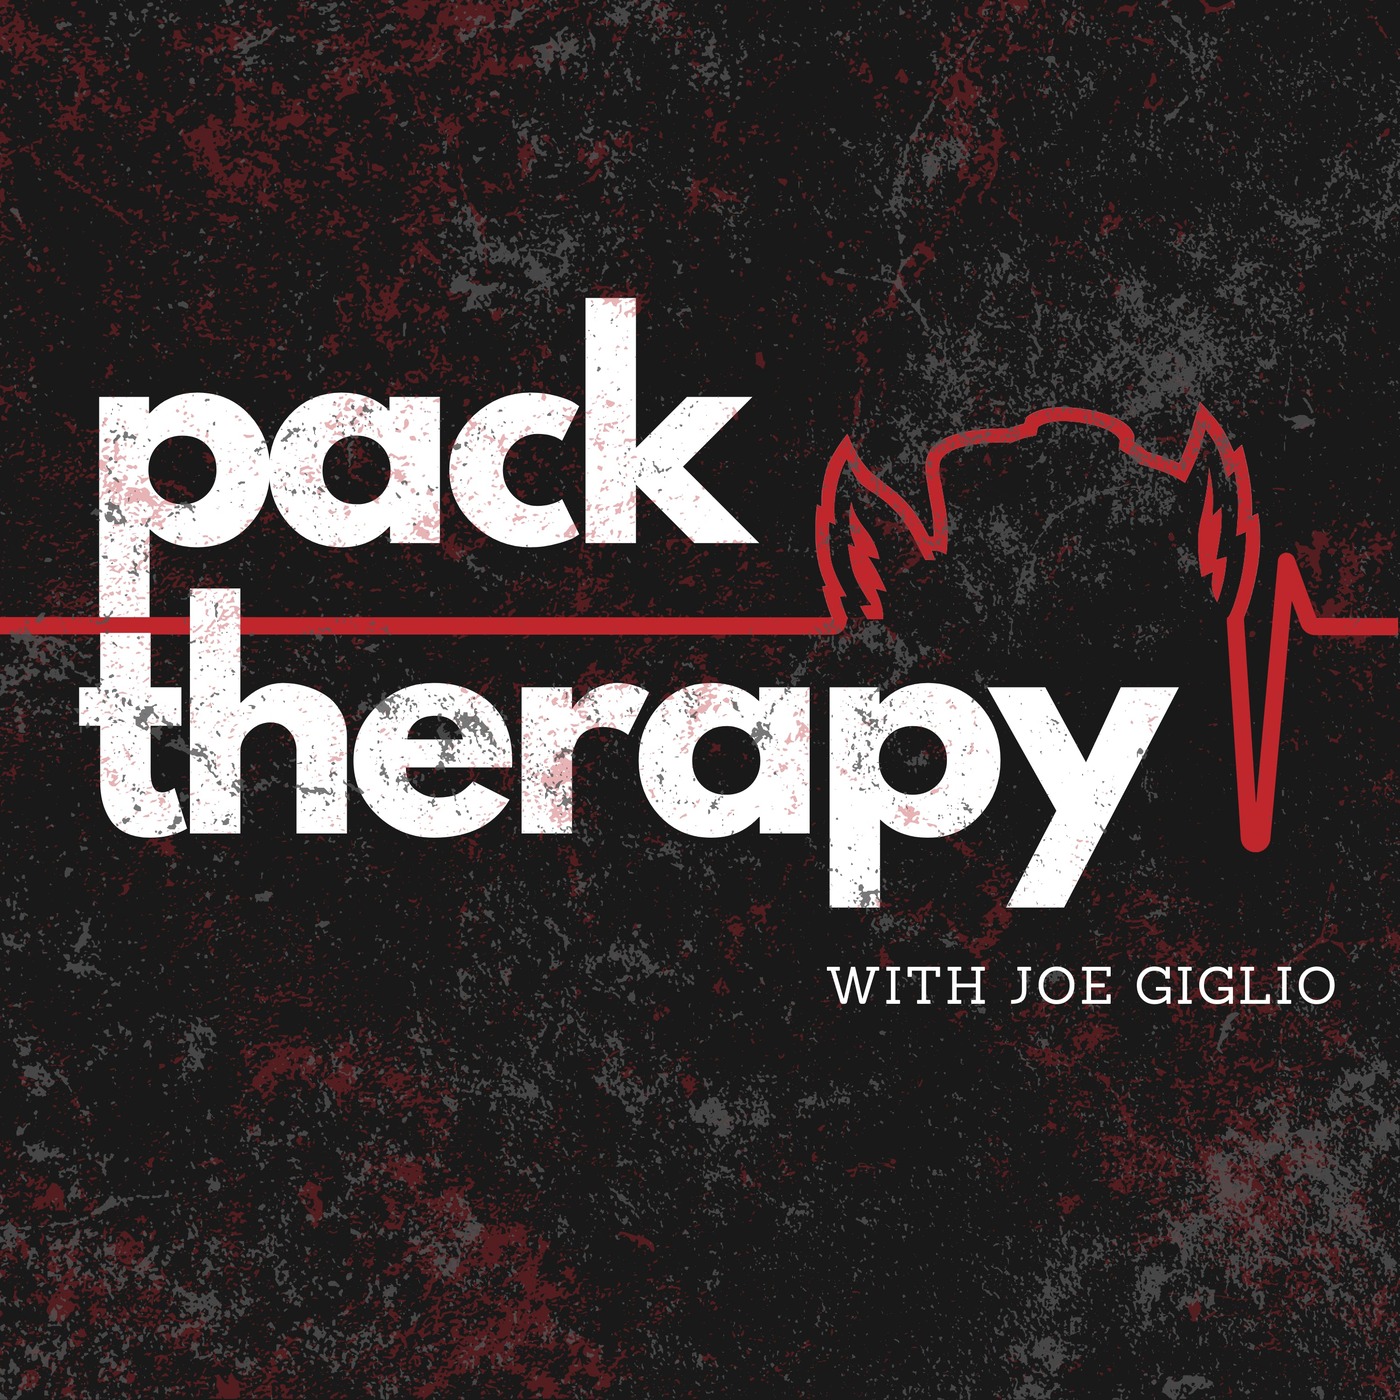 Pack Therapy